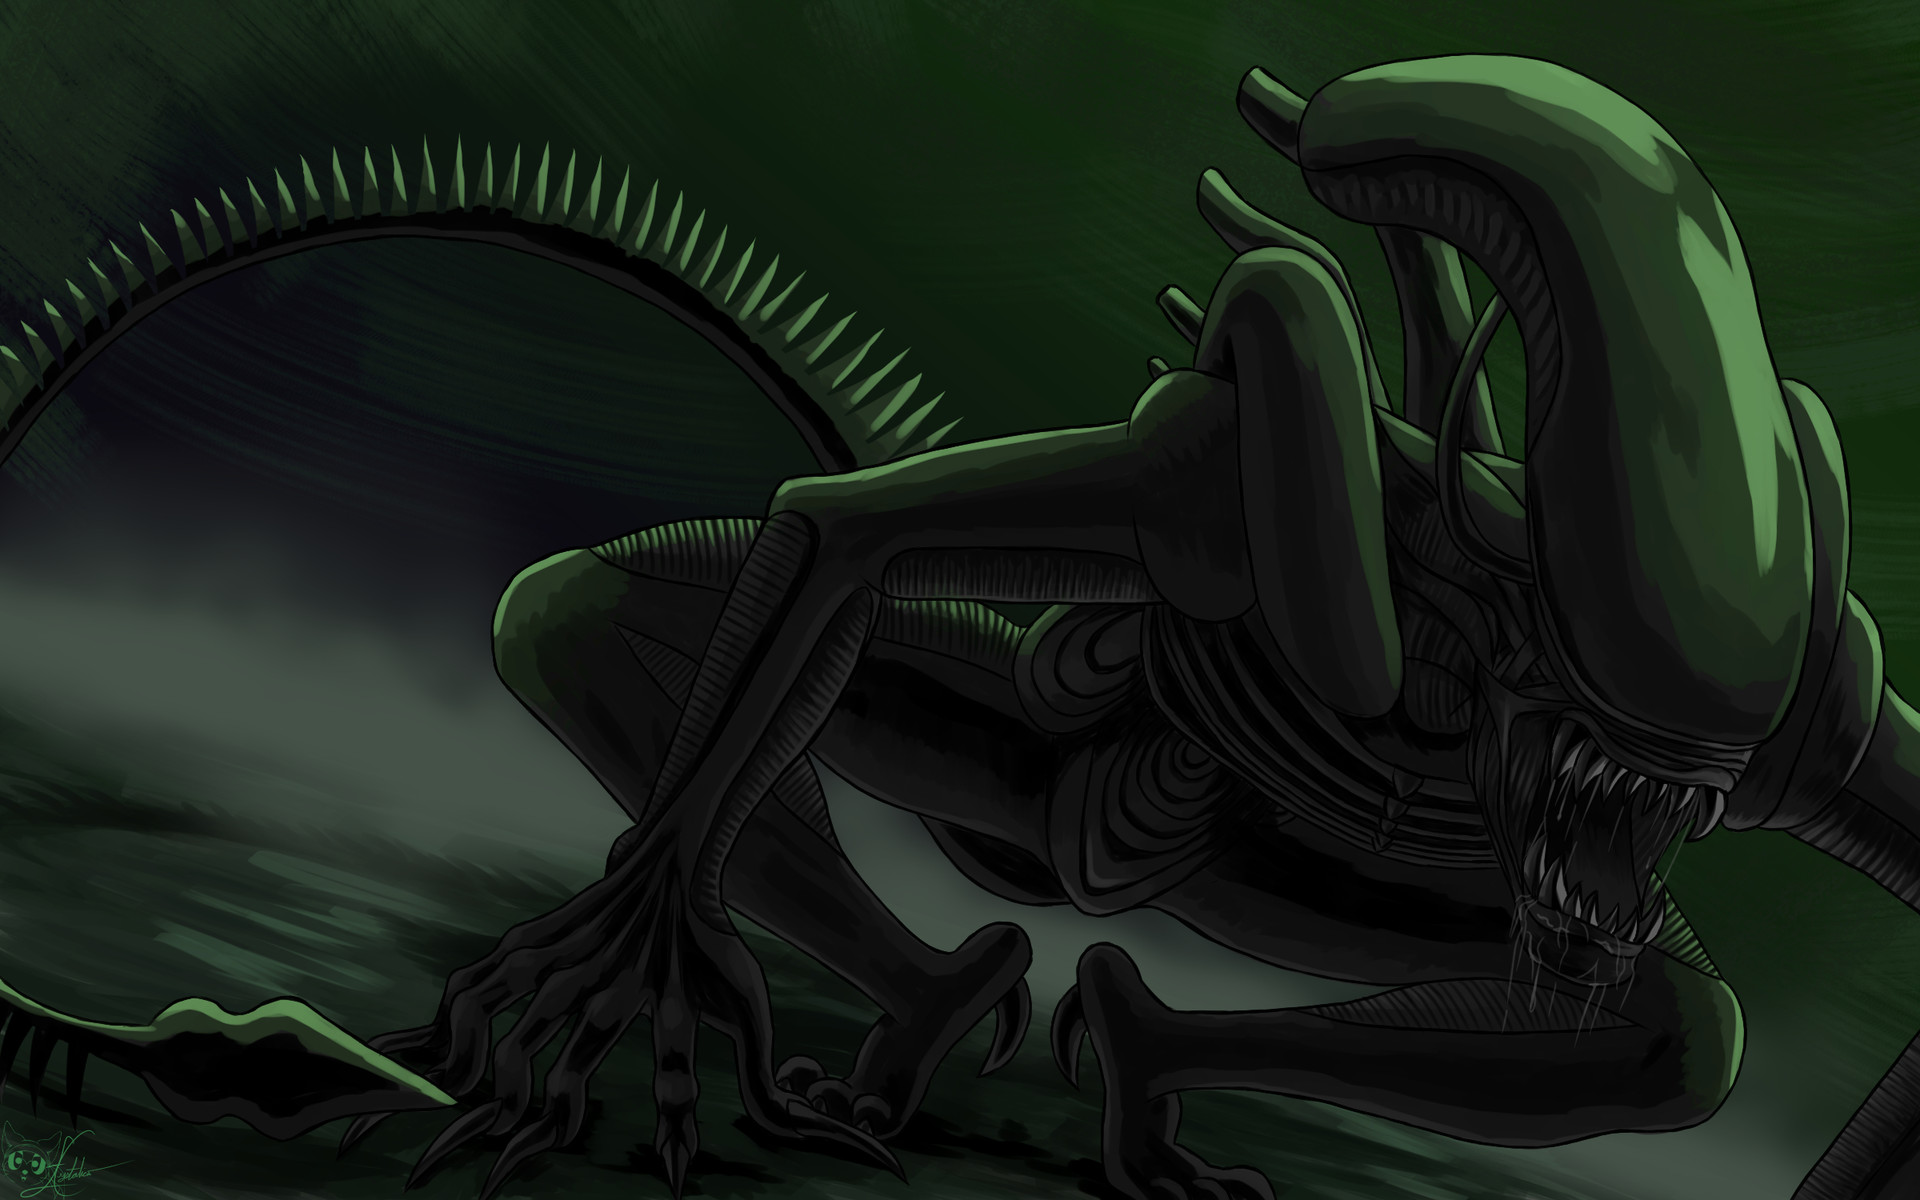 Well what perfect timing to have drawn the beautiful Xenomorph on the day t...